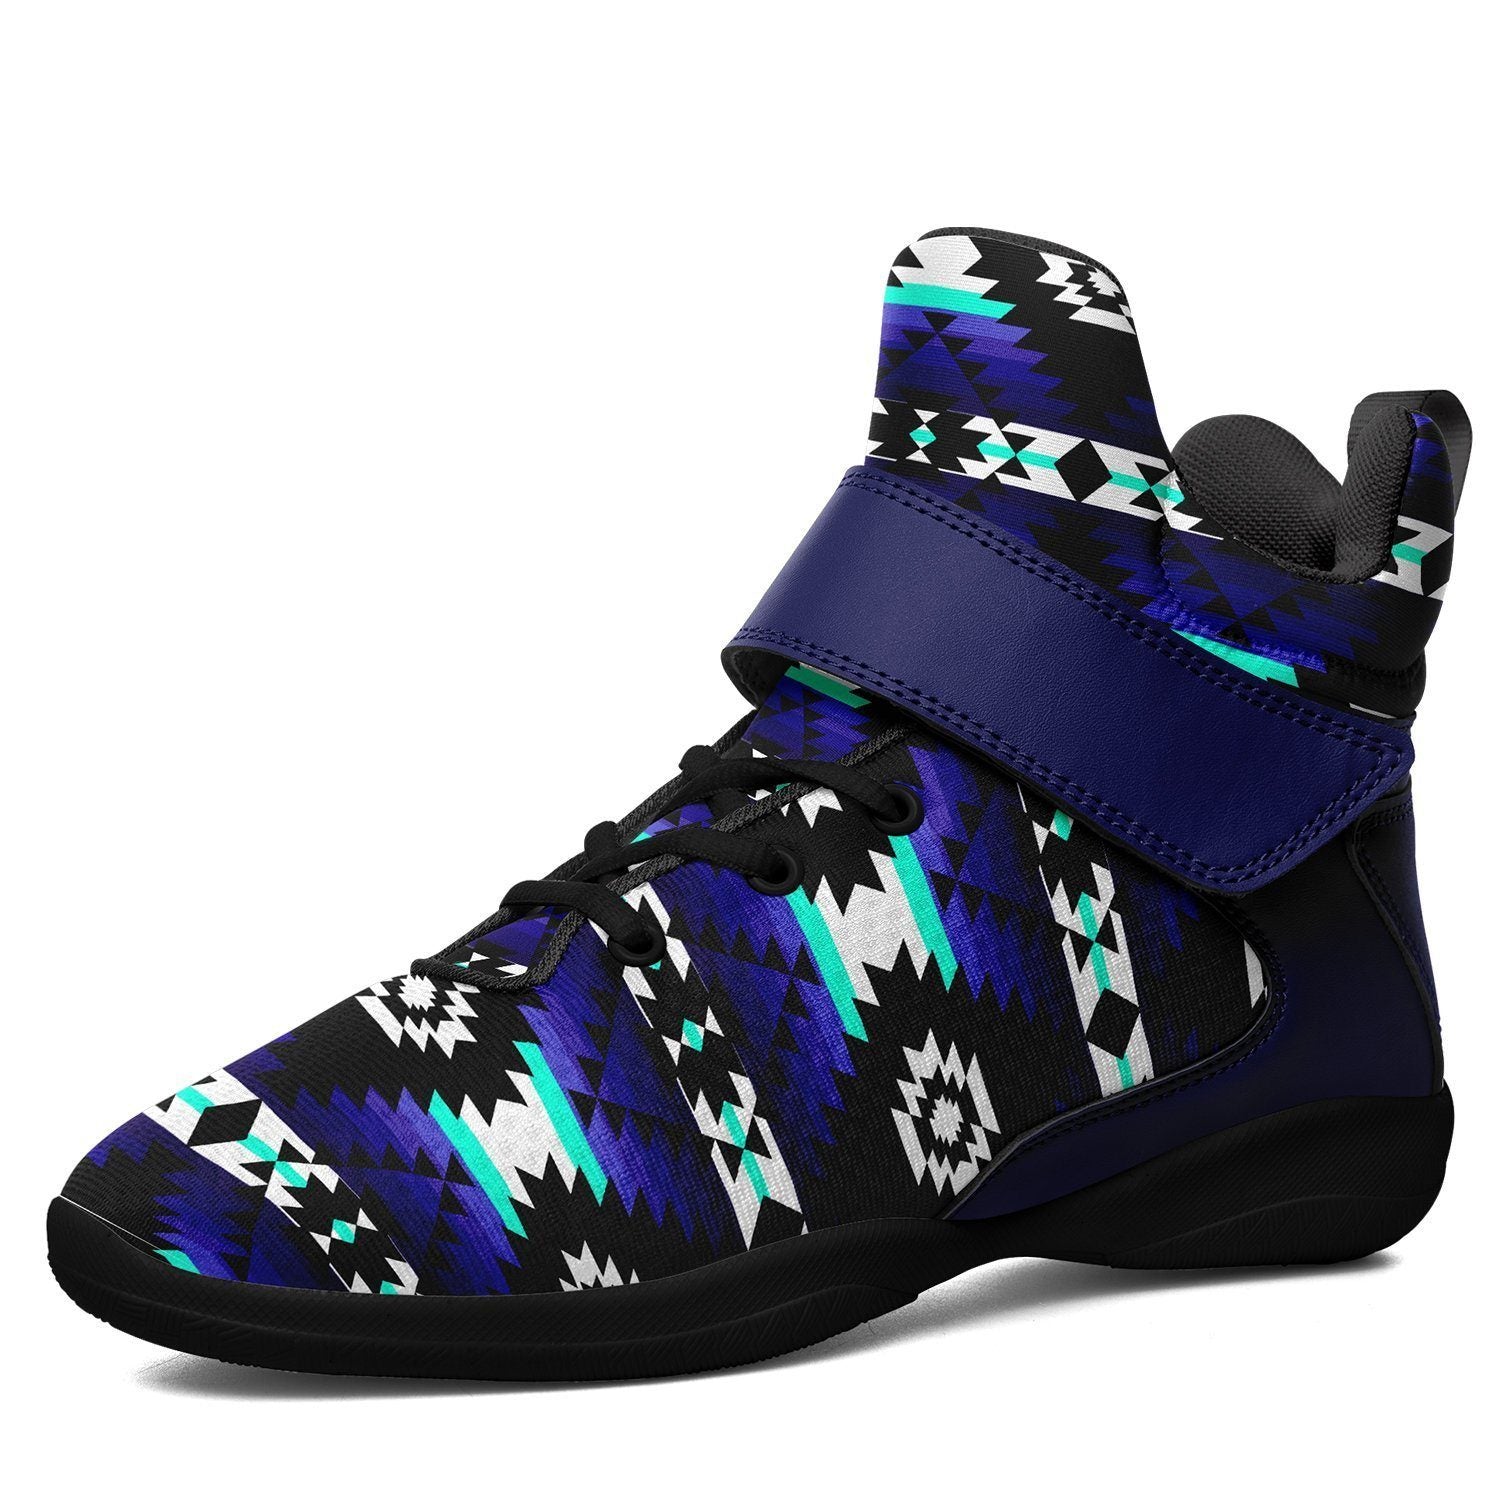 Cree Confederacy Midnight Ipottaa Basketball / Sport High Top Shoes - Black Sole 49 Dzine US Men 7 / EUR 40 Black Sole with Blue Strap 